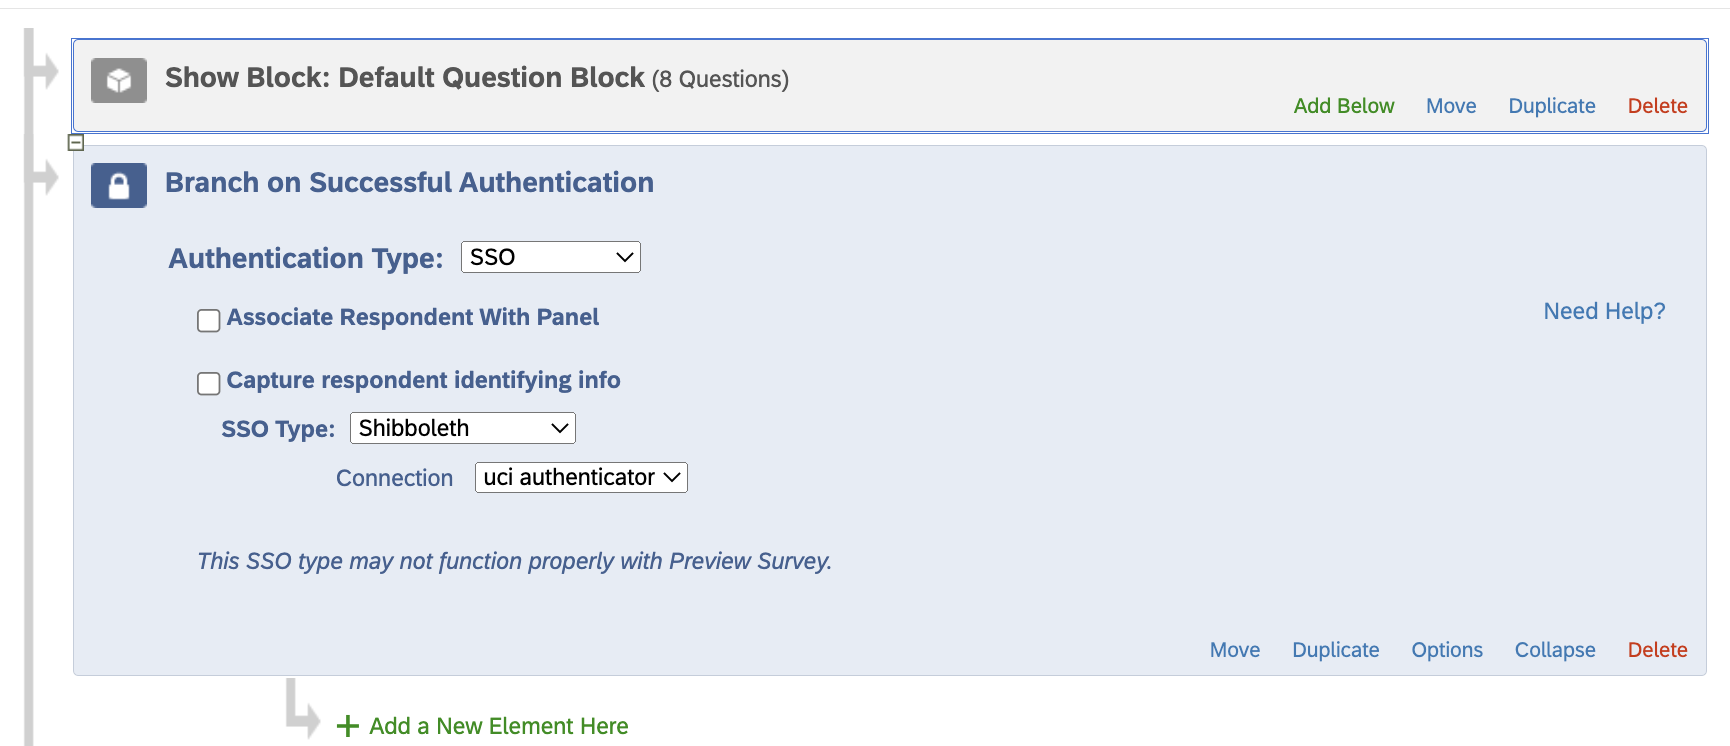 Image of survey flow showing the question block above the login (authentication) block